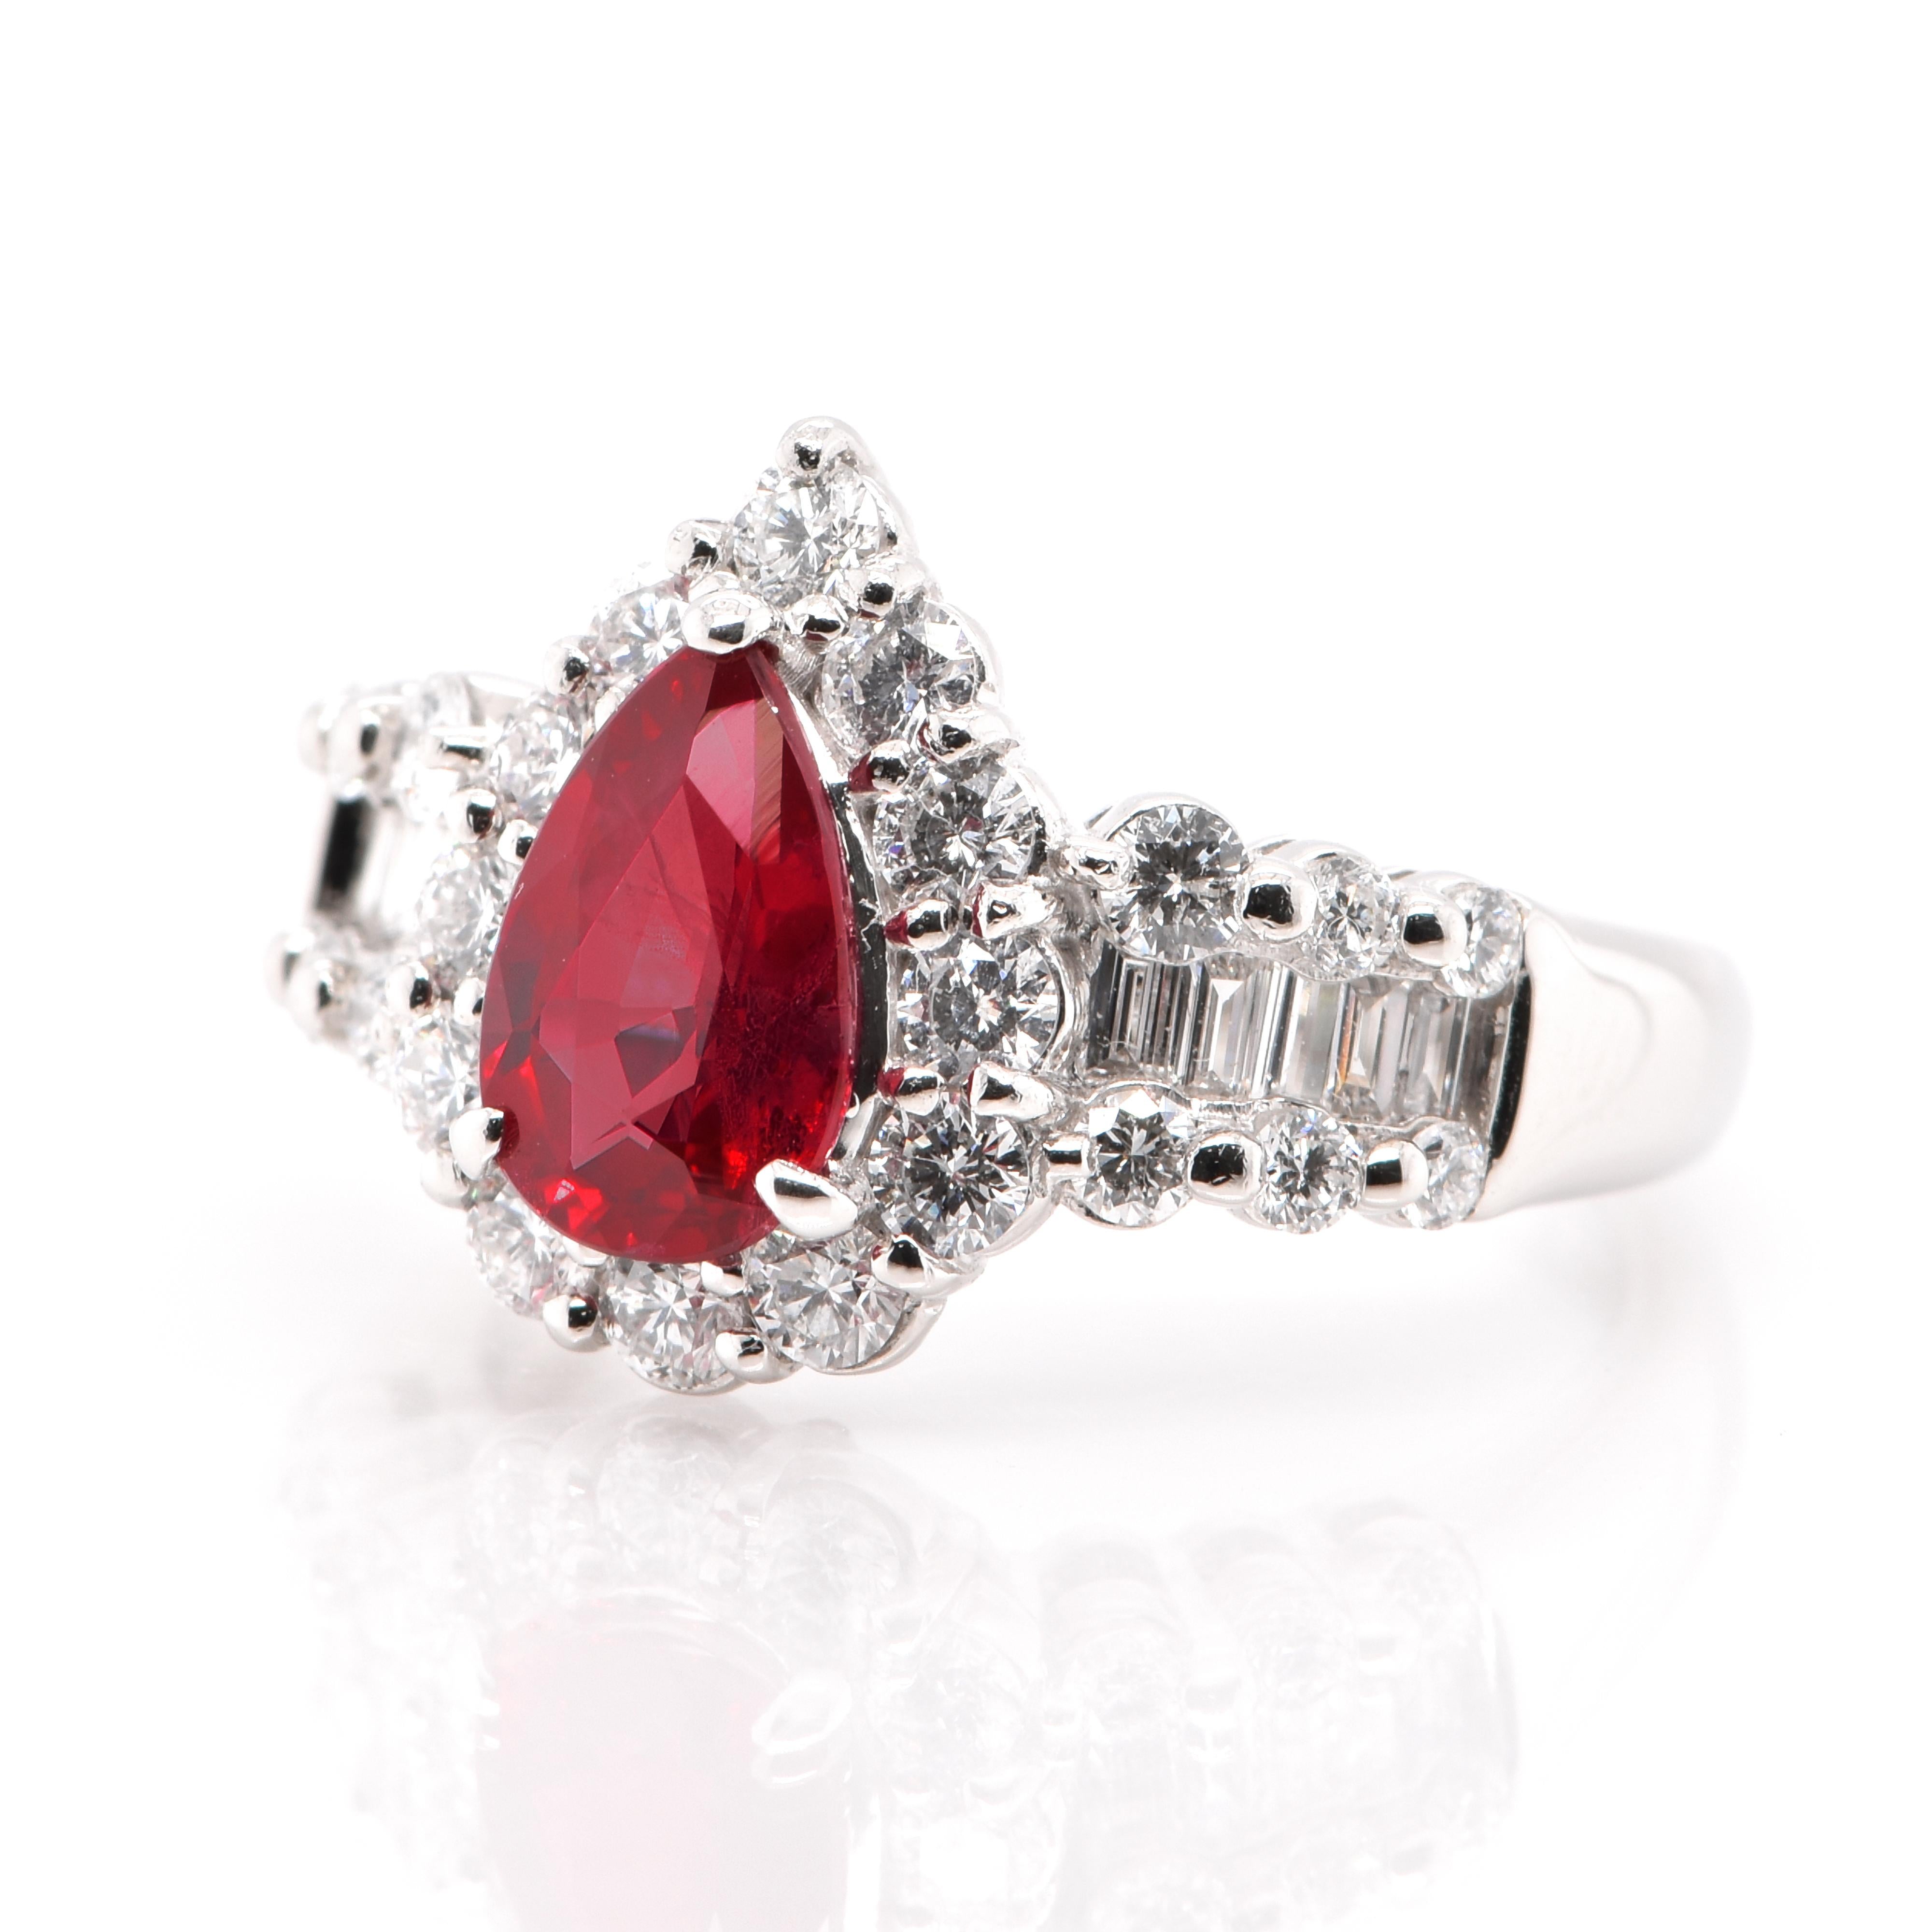 A stunning Ring featuring a GIA Certified, 1.65 Carat, Natural, Pigeon's Blood, Burmese Ruby and 1.05 Carats of Diamonds set in Platinum. Rubies are referred to as 